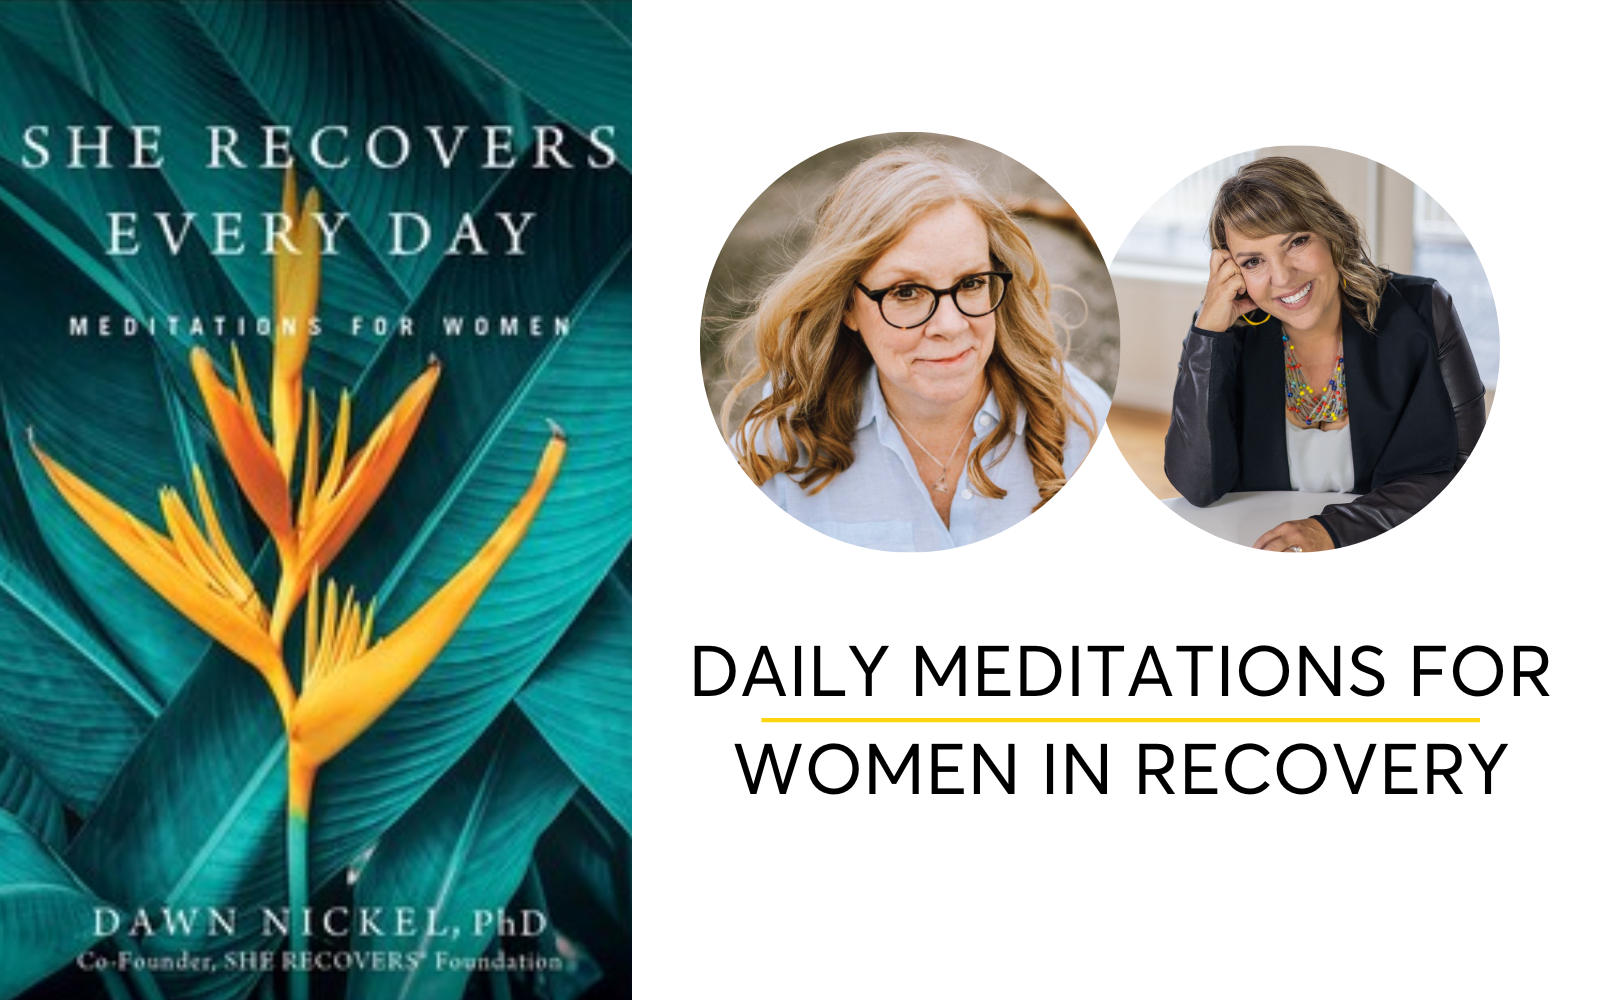 Daily Meditations for Women Helps In The Practice Of Recovery